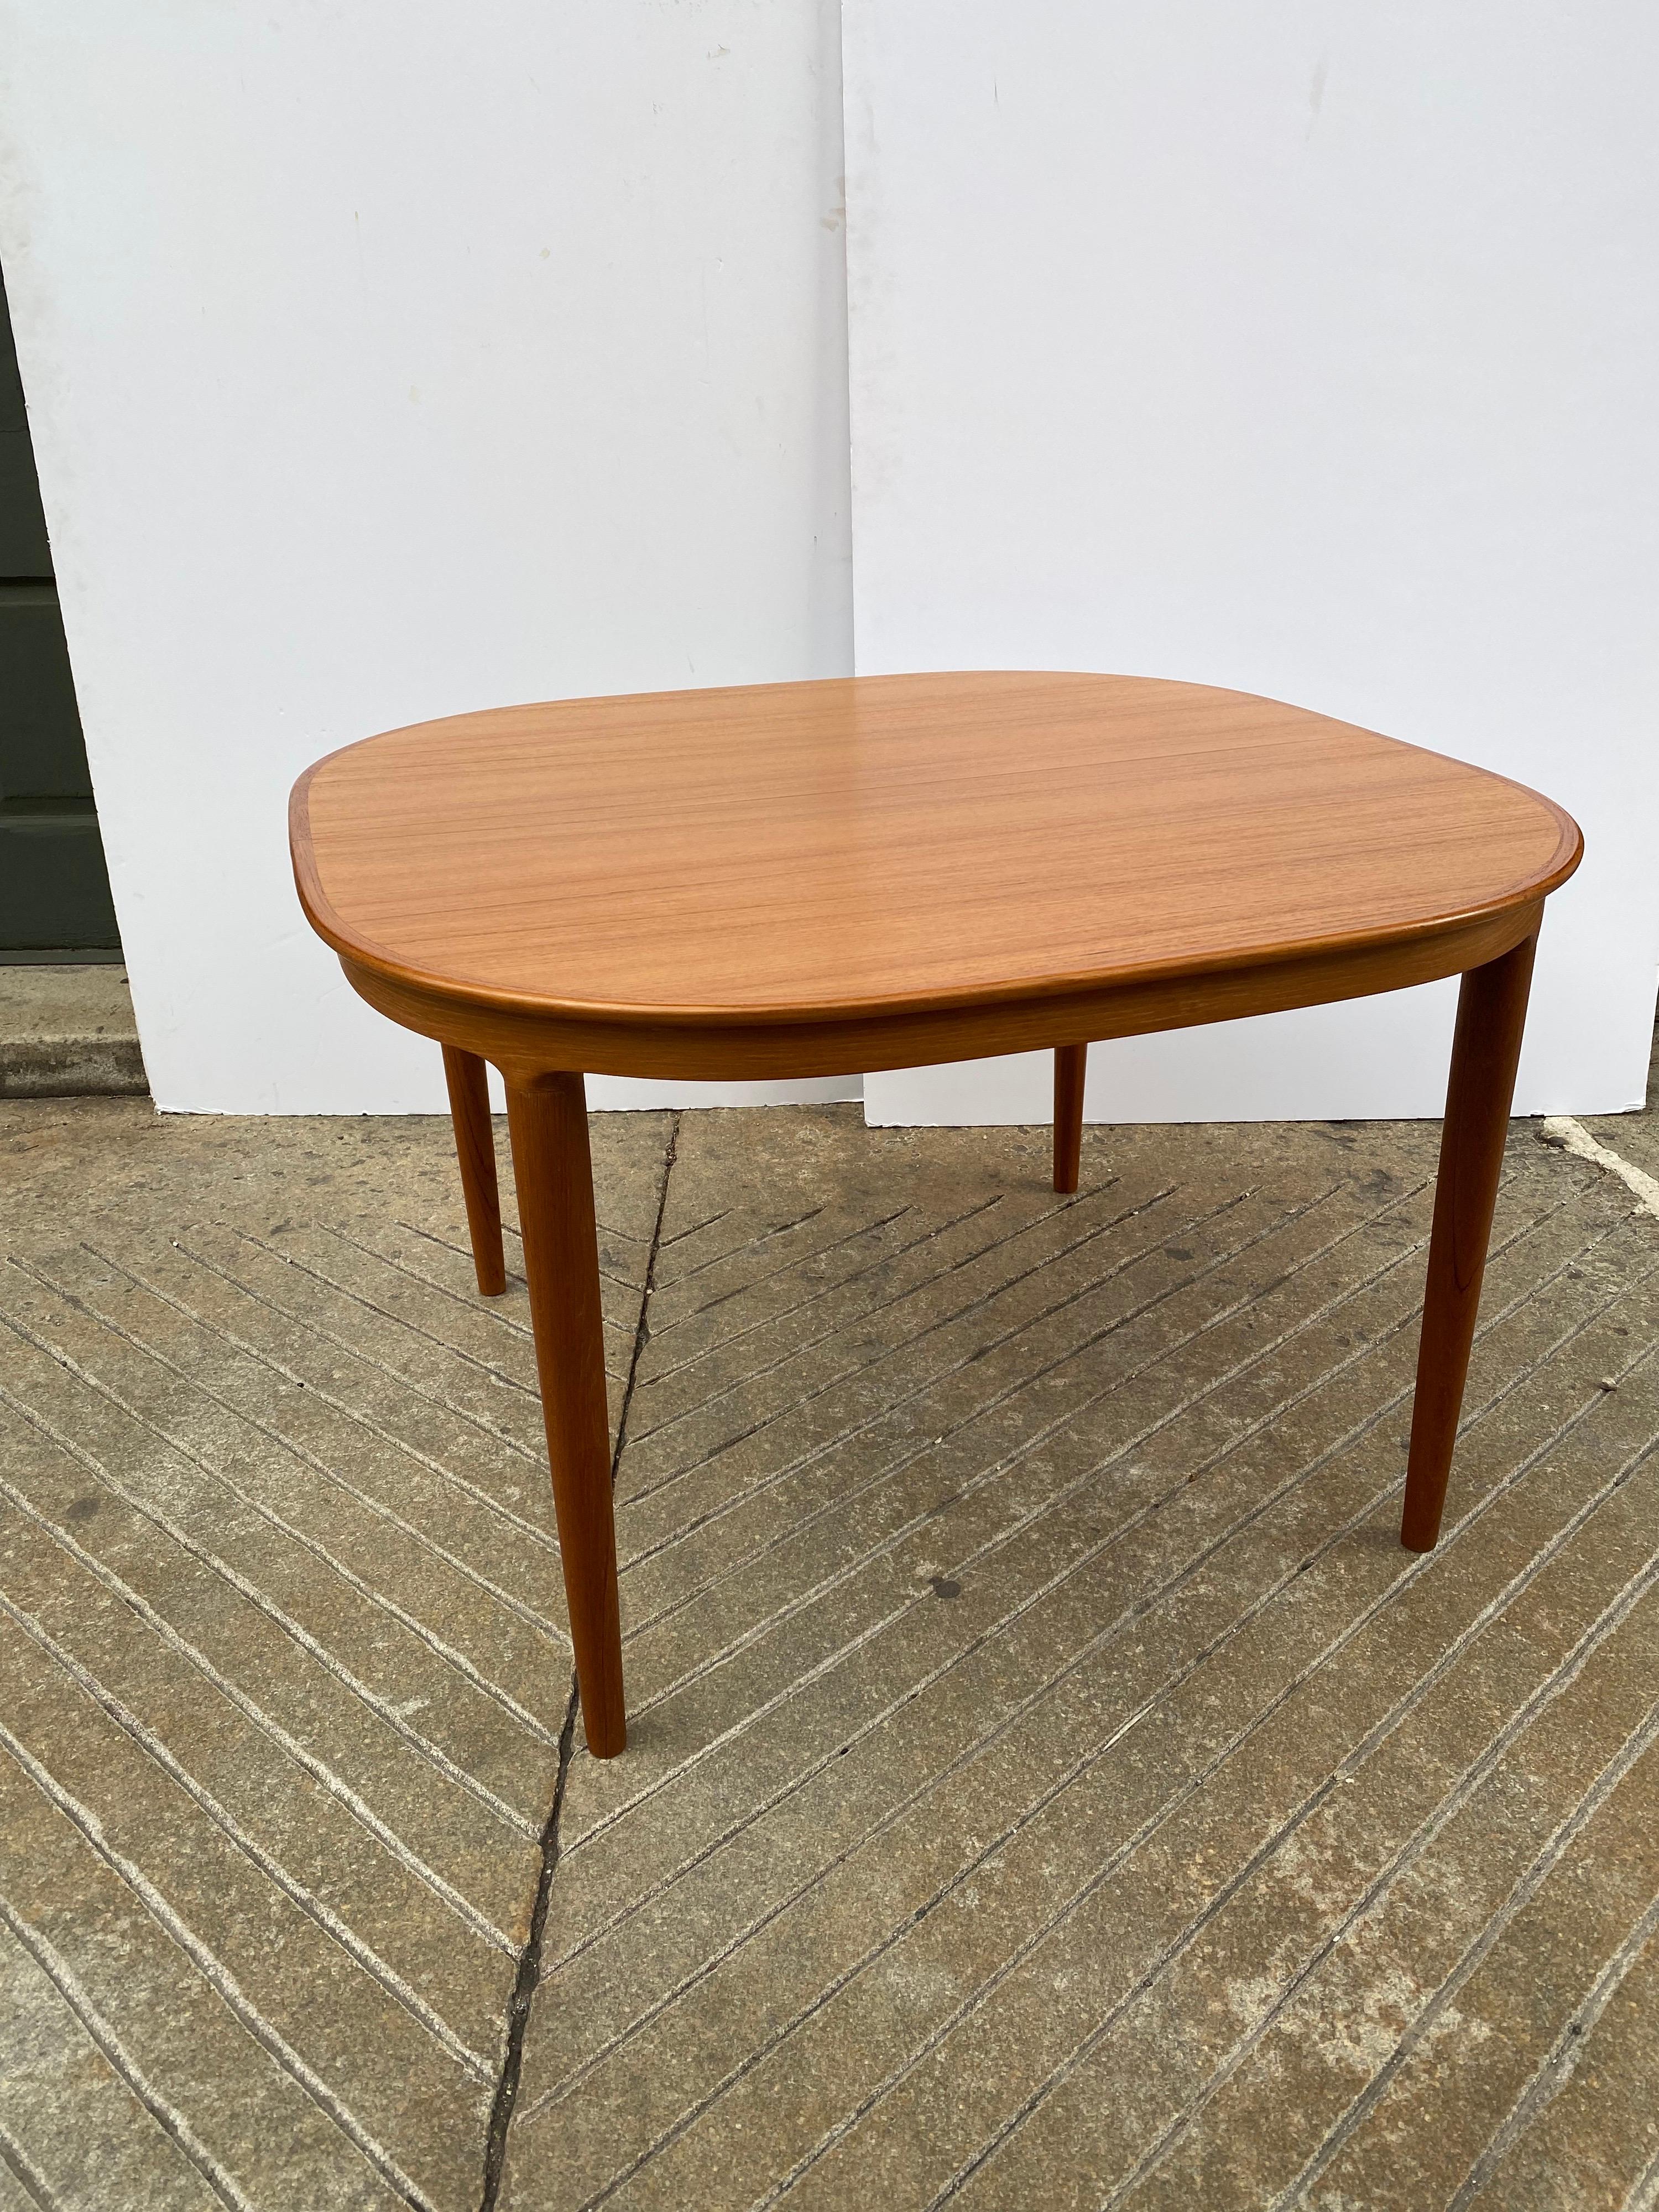 rounded corner table